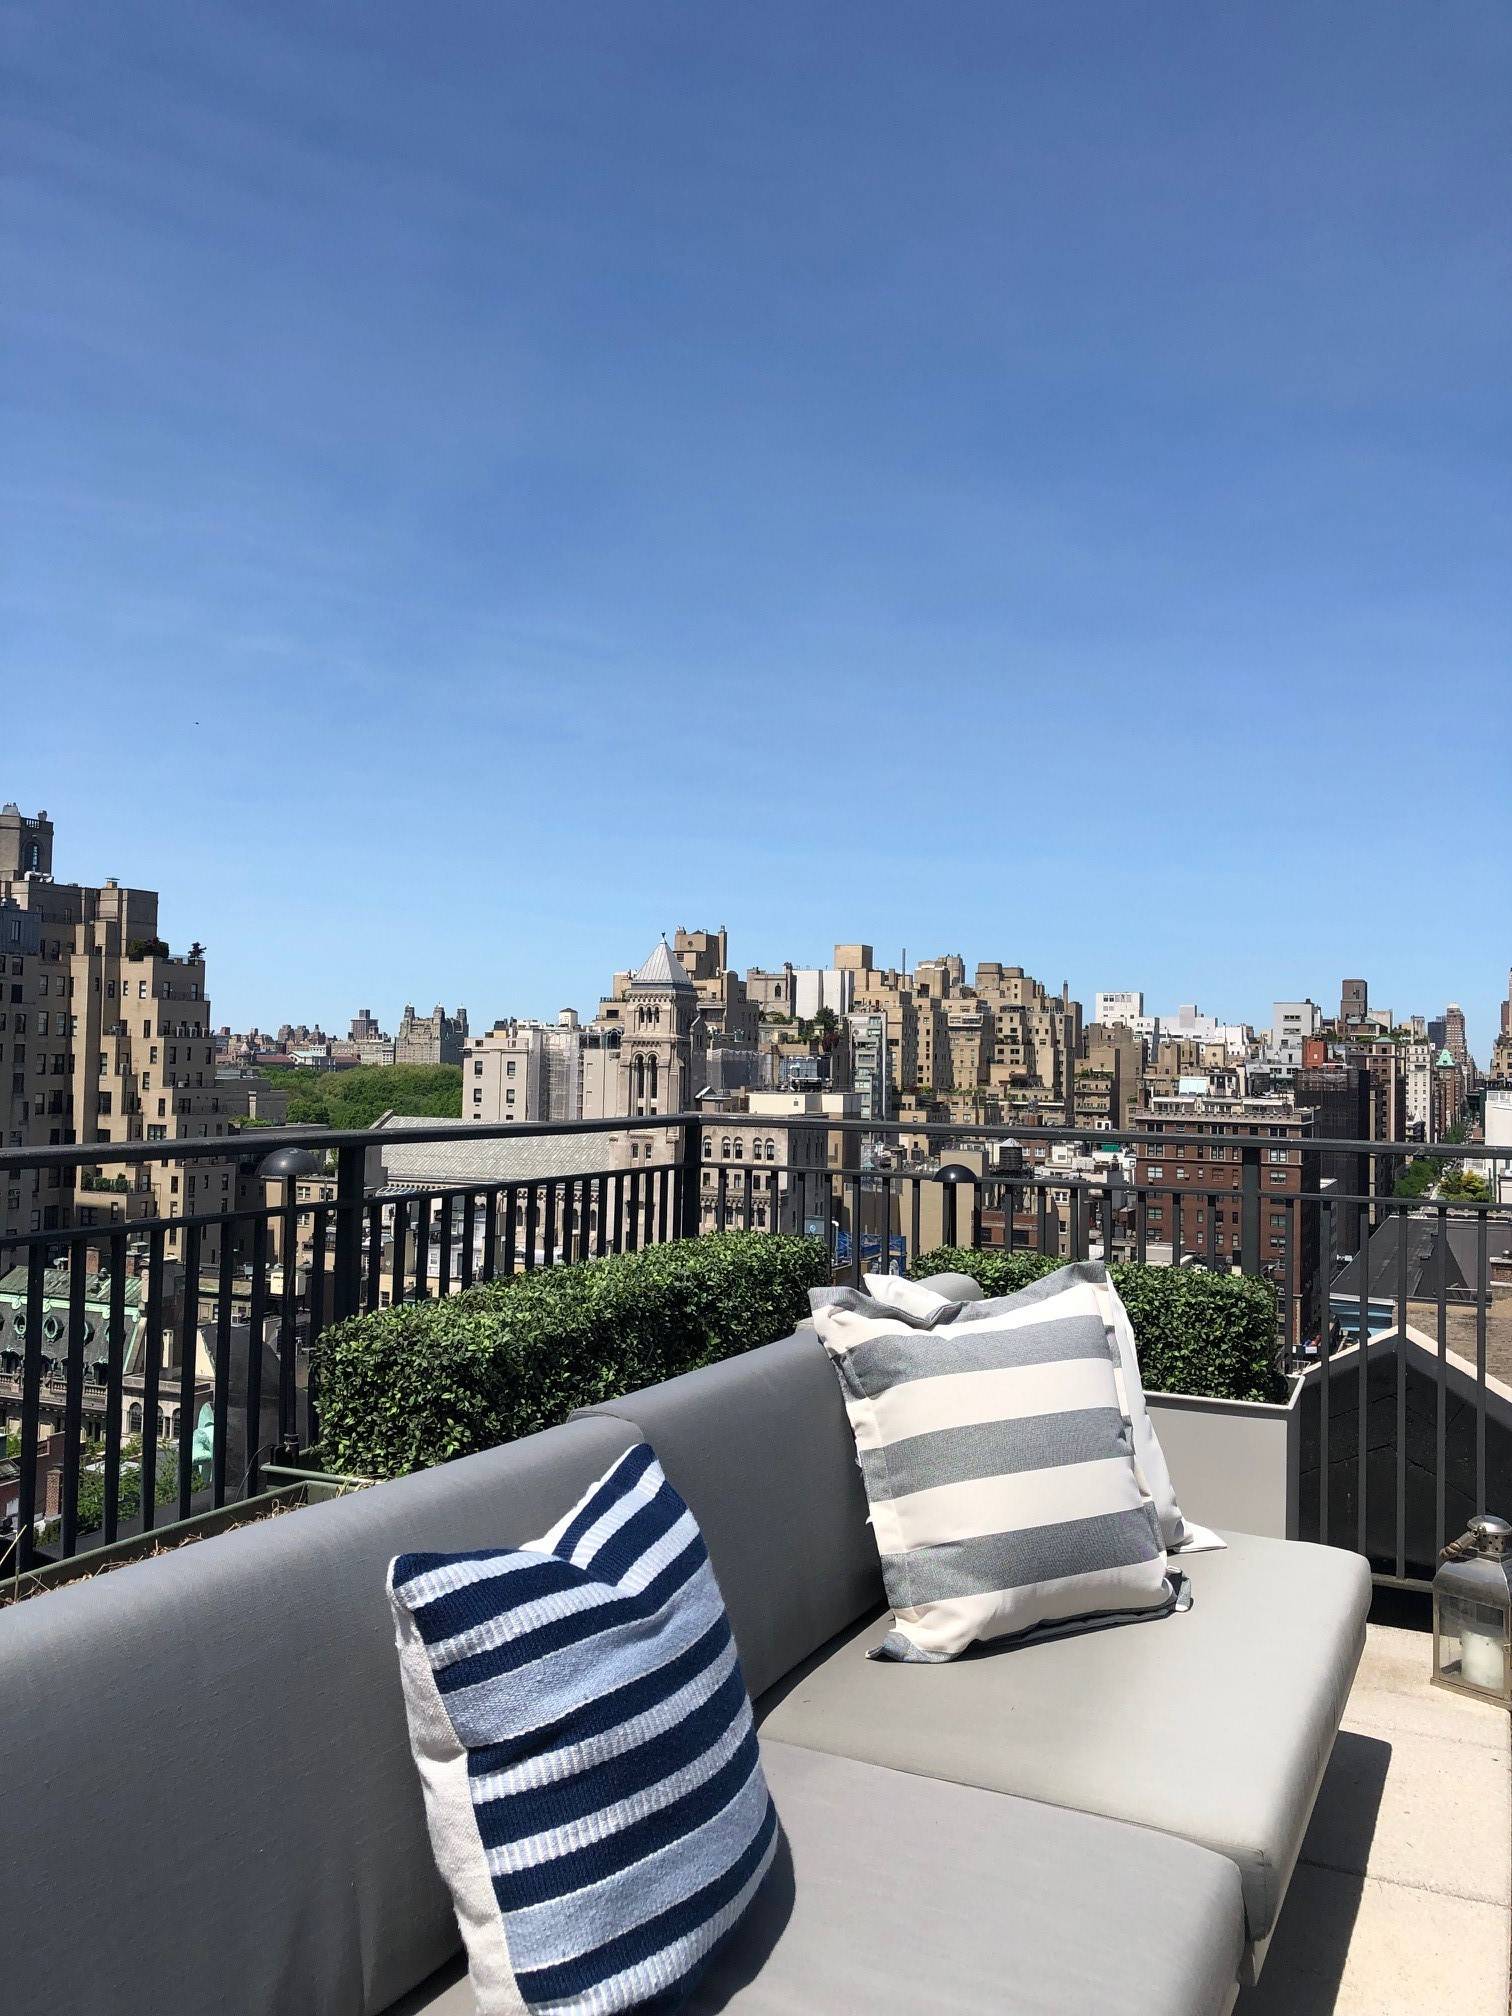 This is a once in a lifetime opportunity to assemble three apartments, creating the most incredible prewar condominium Penthouse to come to the marketplace.